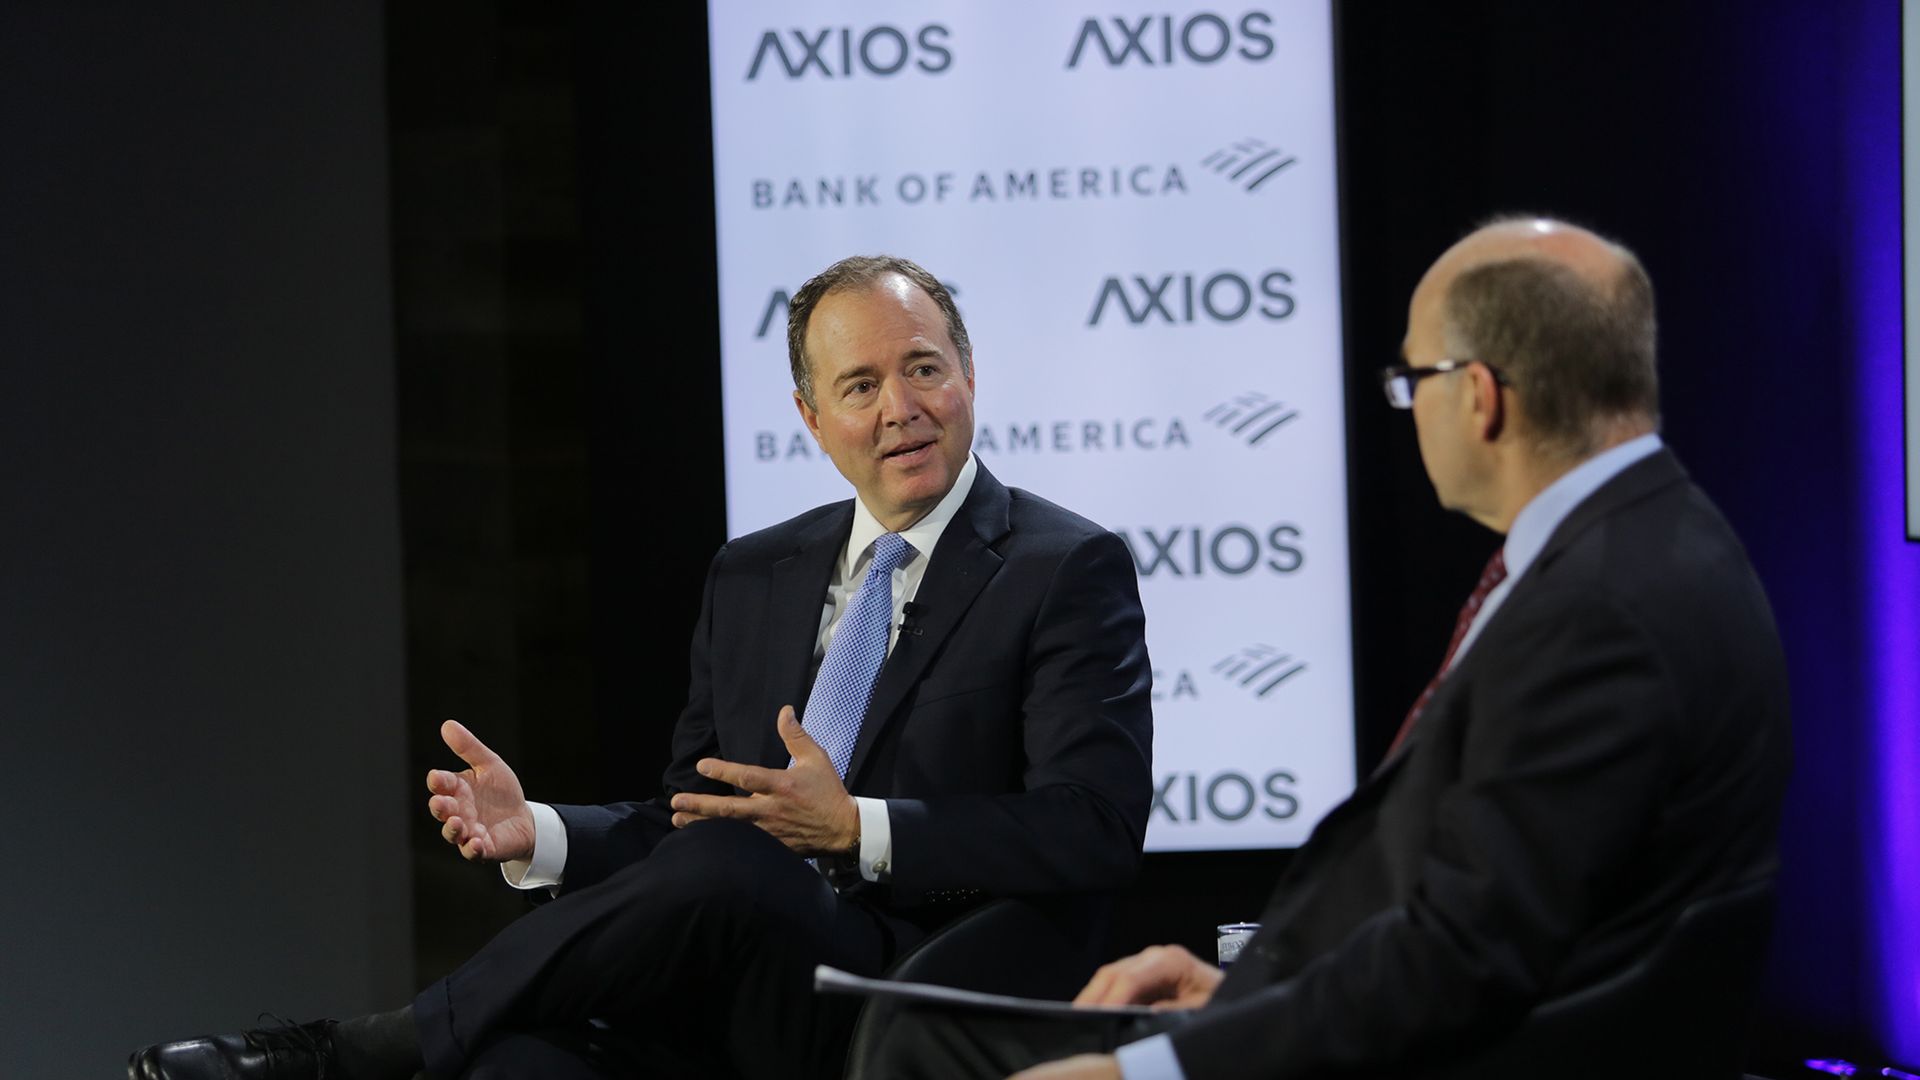 Rep. Adam Schiff sits with Axios' Mike Allen on the Axios stage.